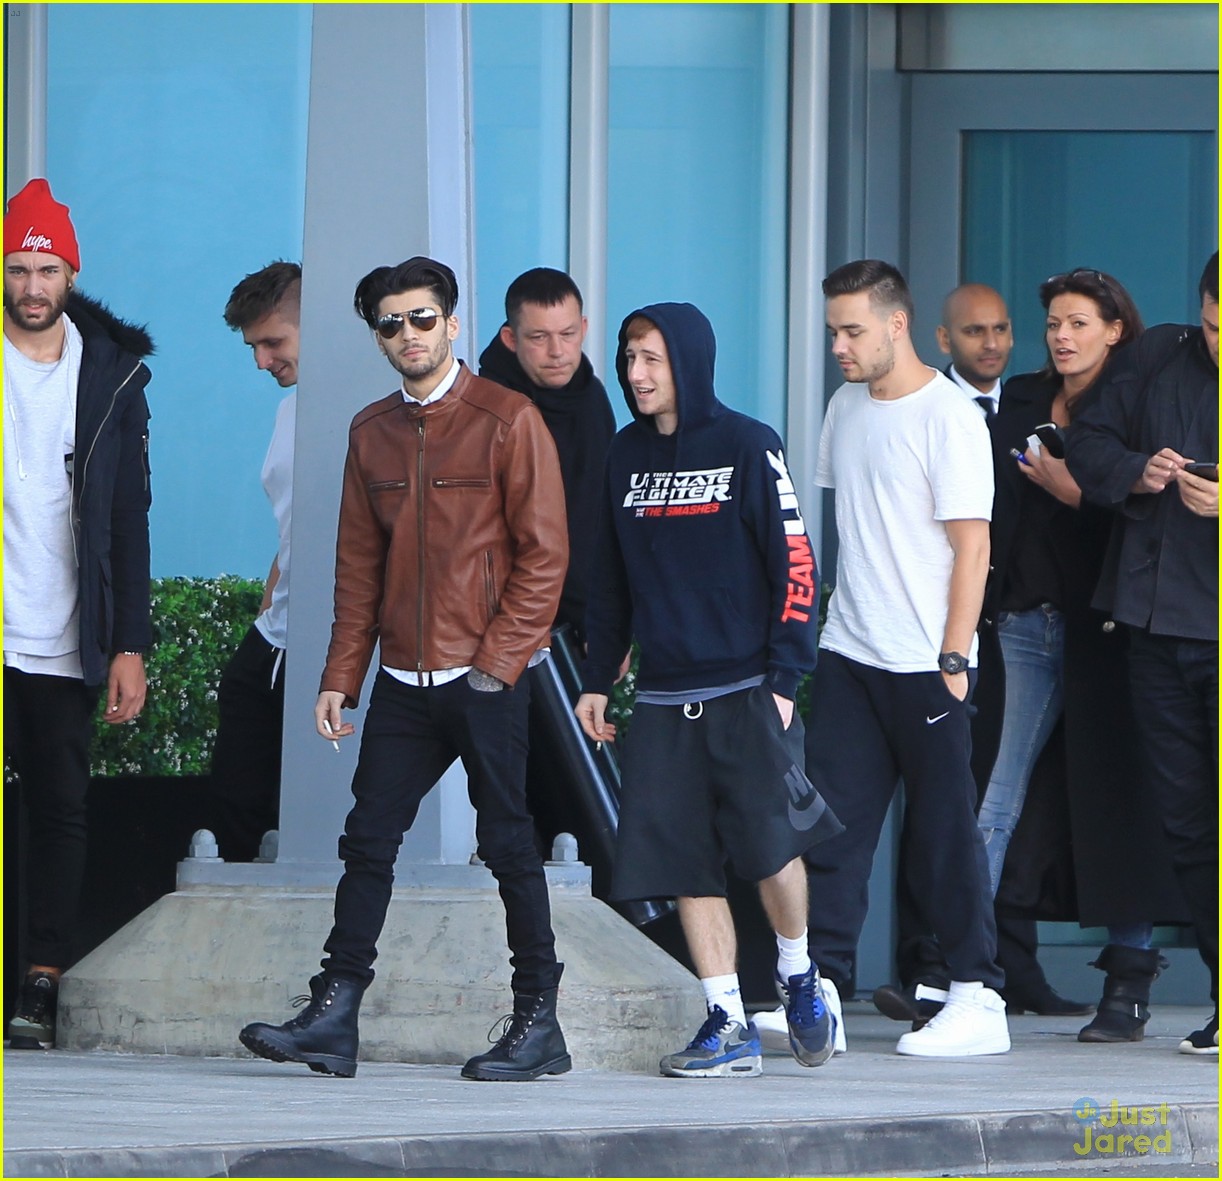 one direction back in london after tour 05